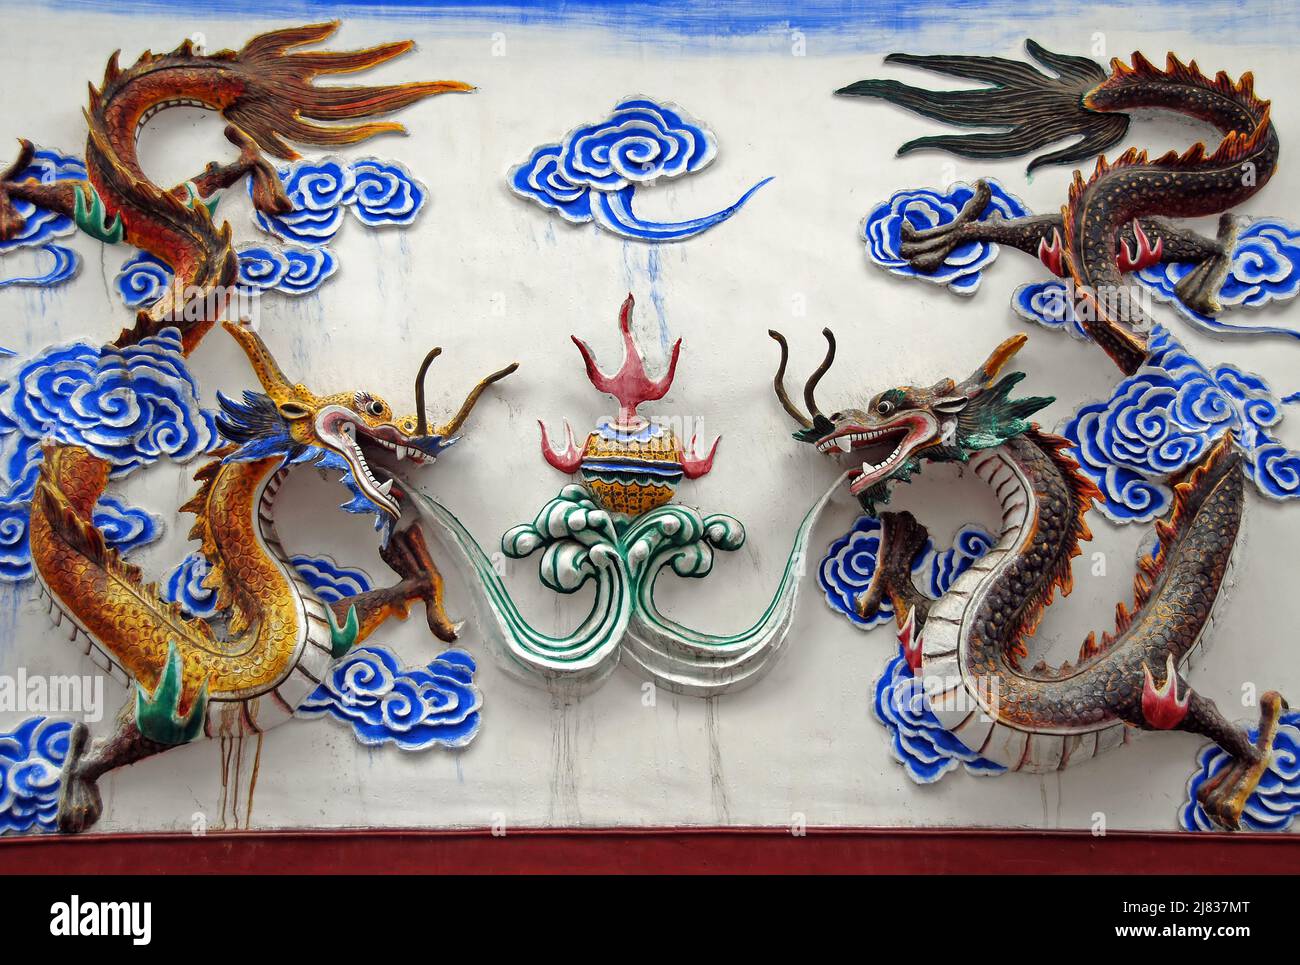 Fenghuang, Hunan Province, China: A dragon screen in Fenghuang showing two colorful dragons. Traditional Chinese art. Stock Photo